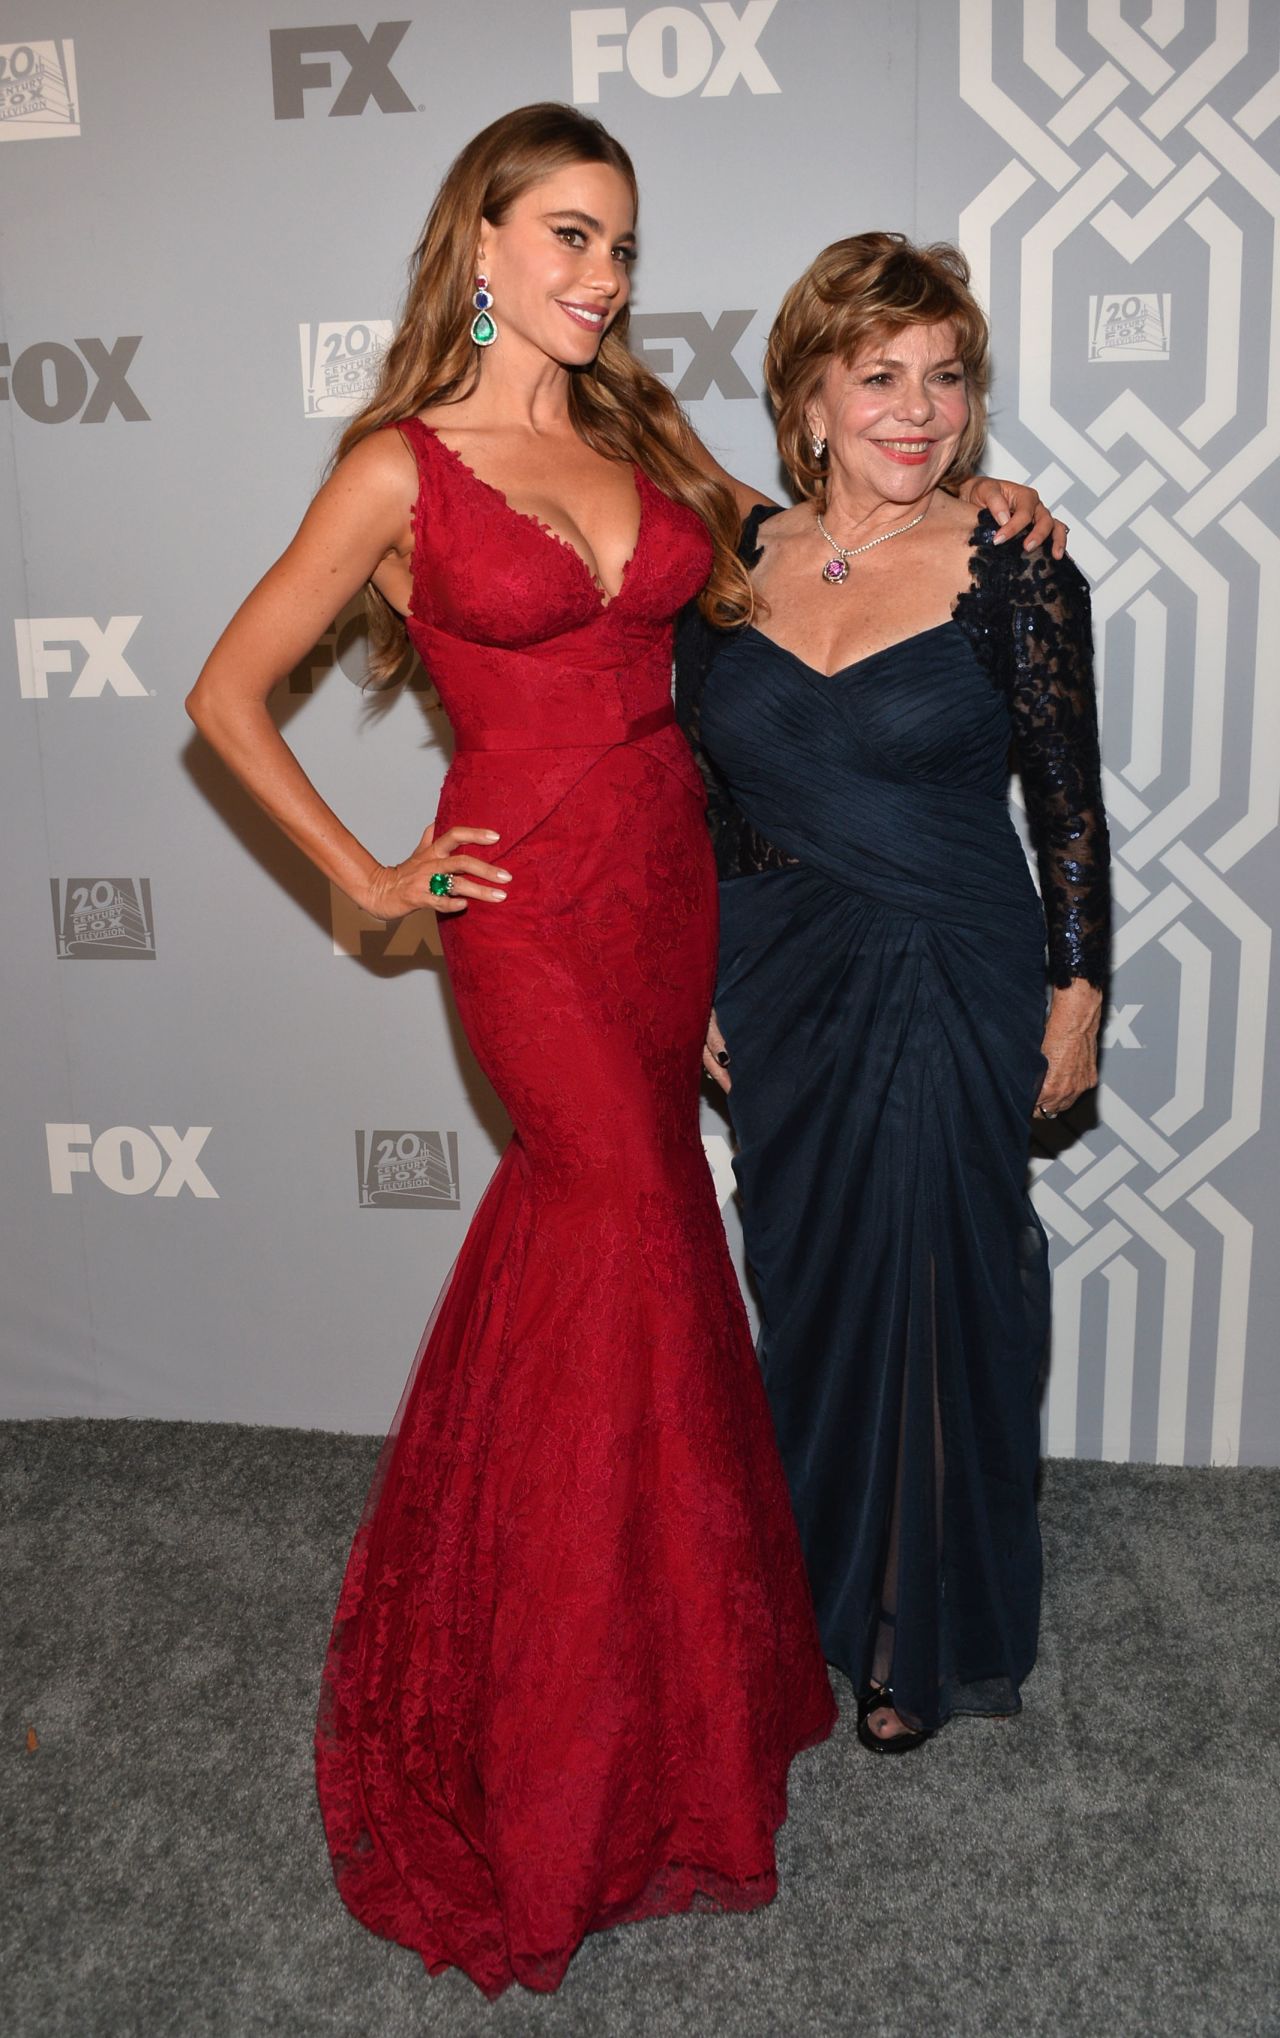 Sofia Vergara made the Emmys a family affair and brought her mom, Margarita, to Fox's after party.